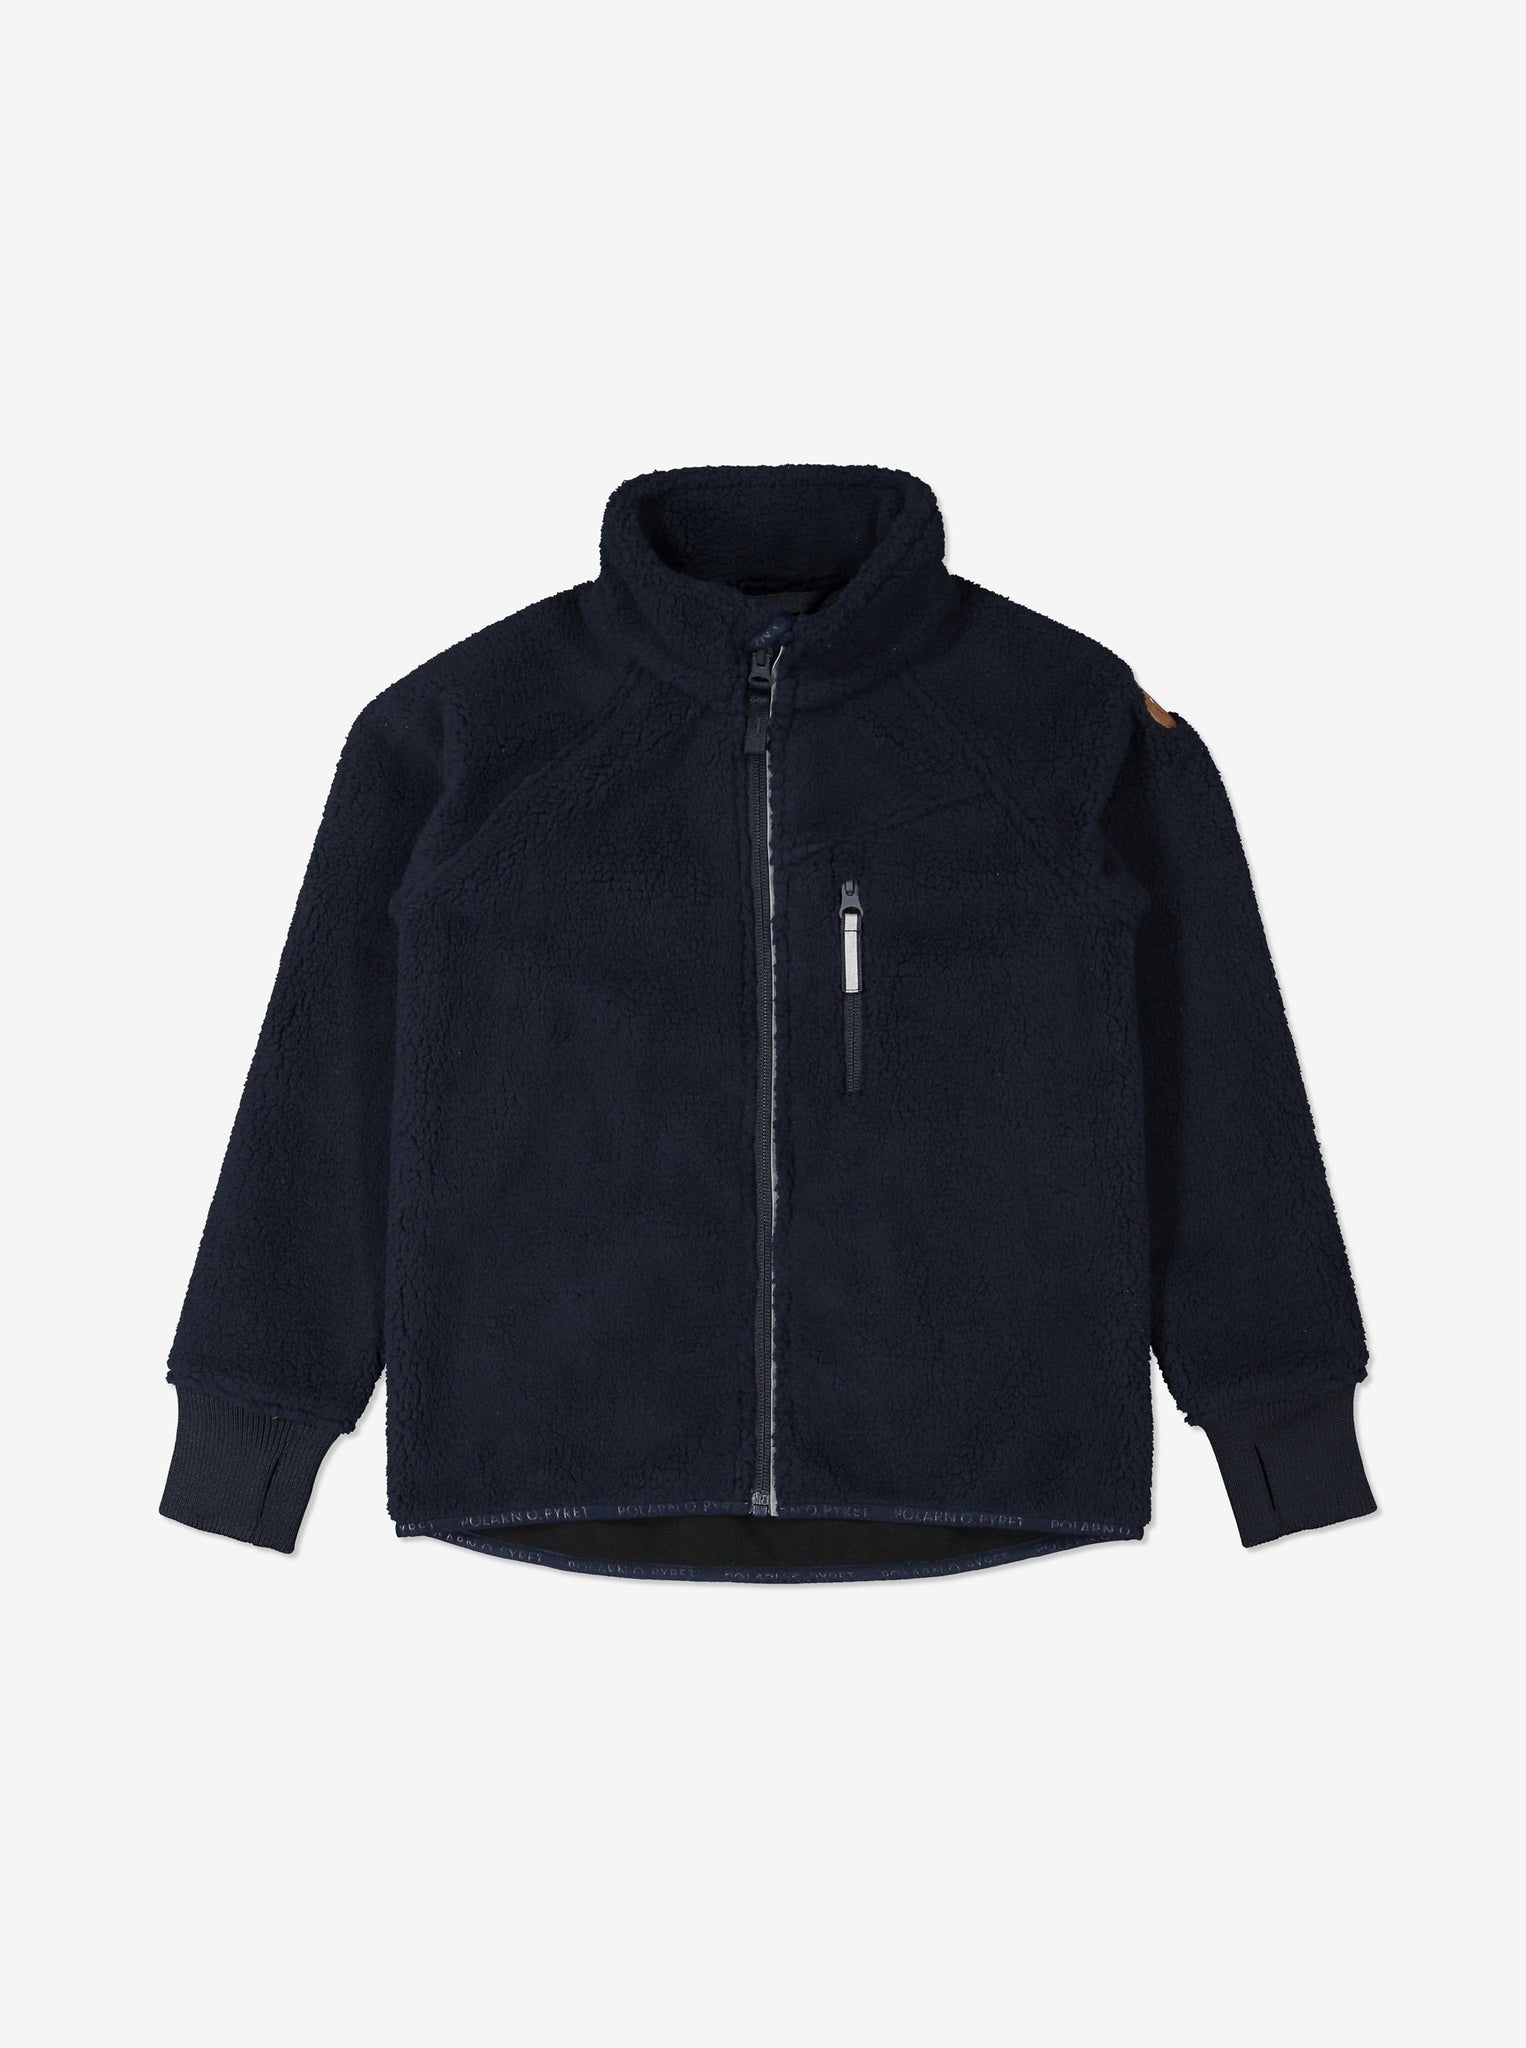 navy sherpa Fleece kids jacket, recycled materials, warm durable long lasting, ethical quality polarn o. pyret